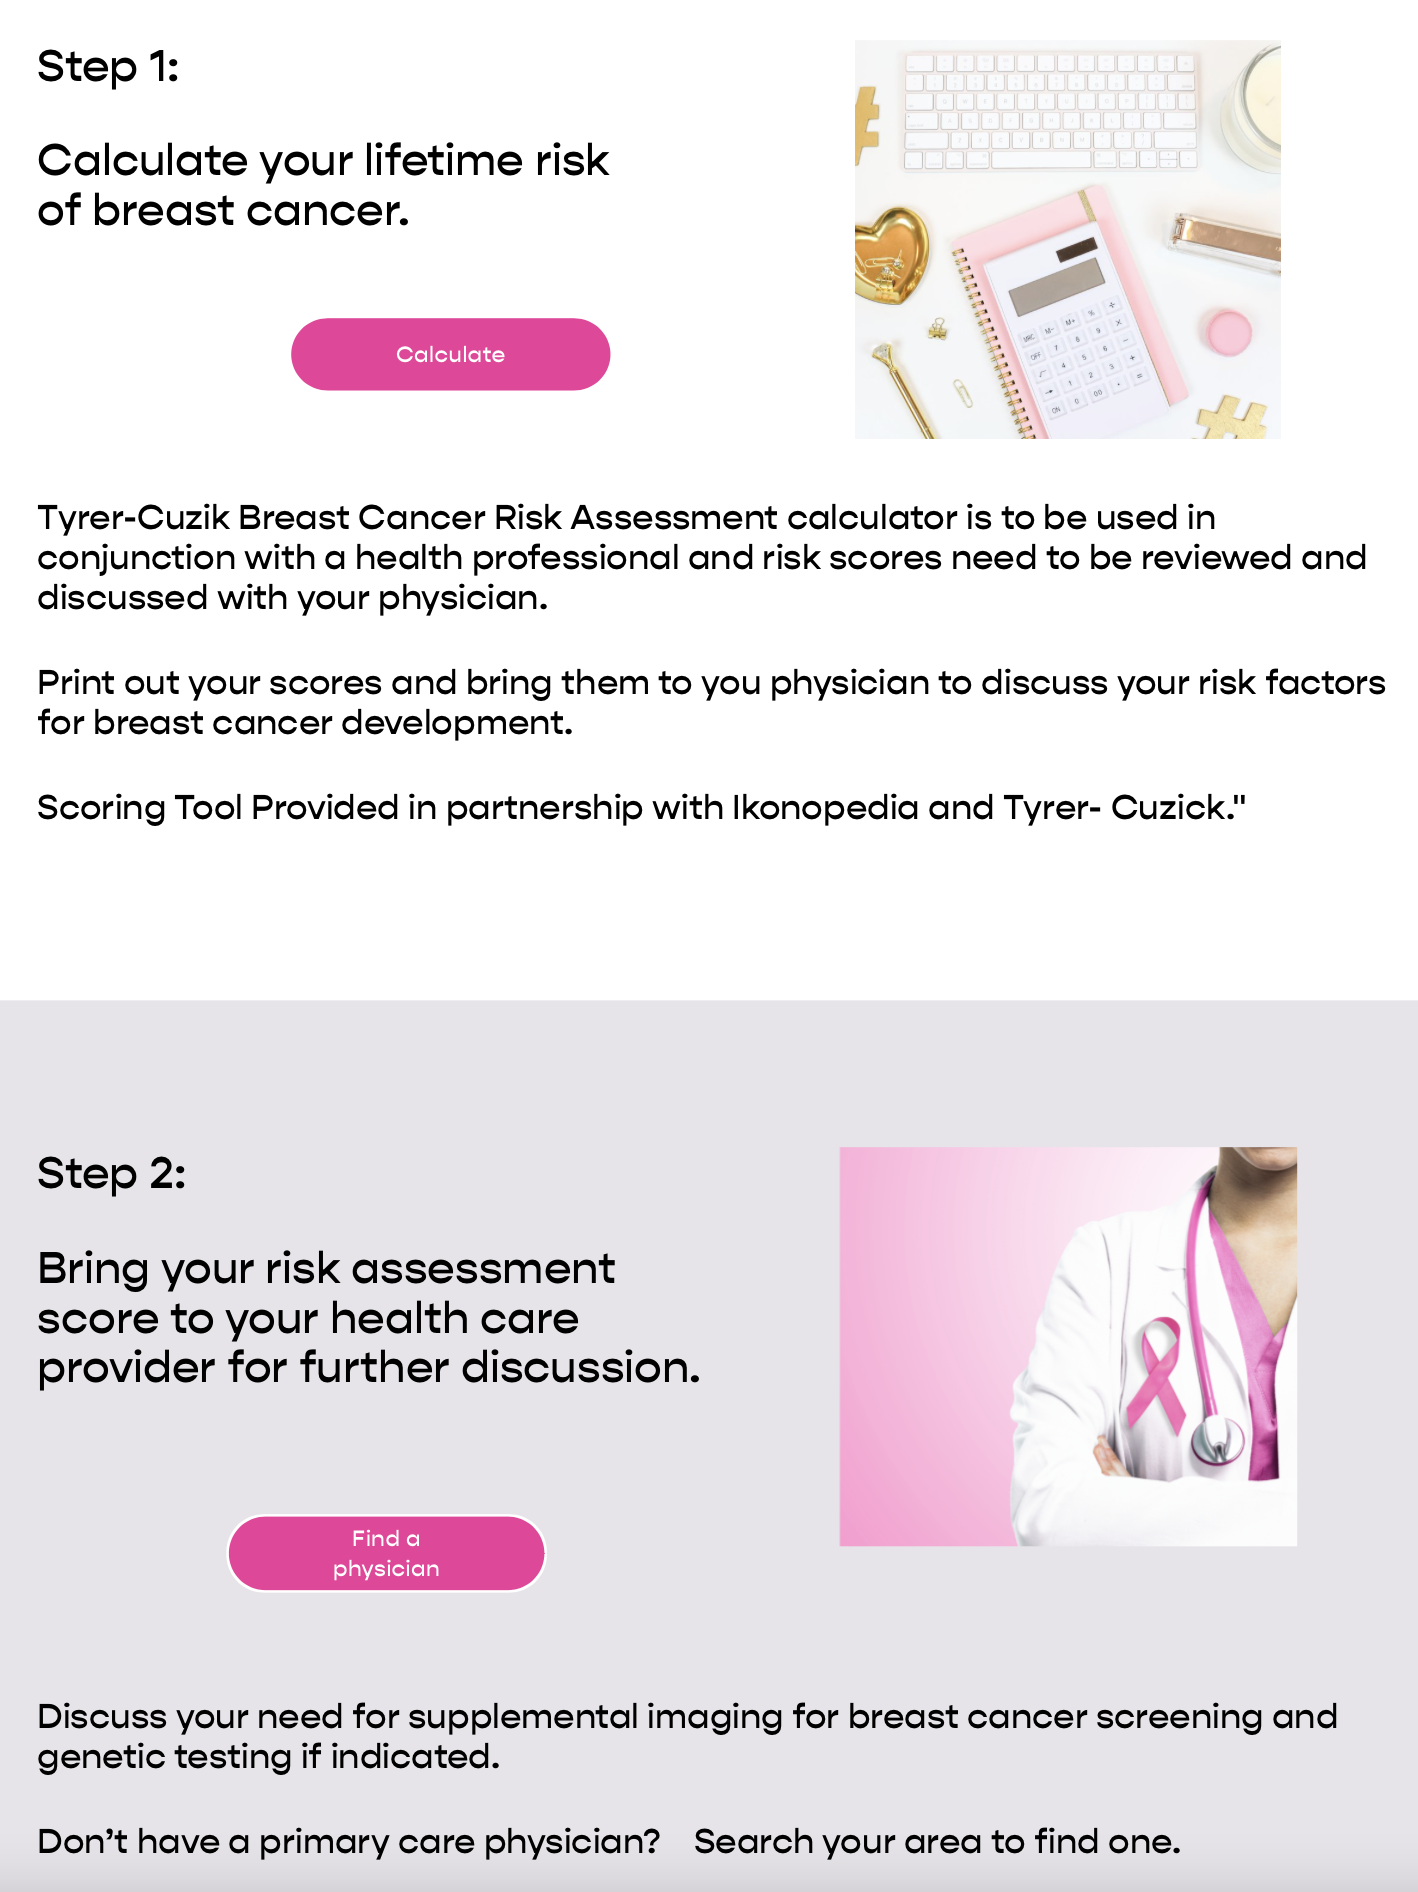 Calculate your risk of breast cancer